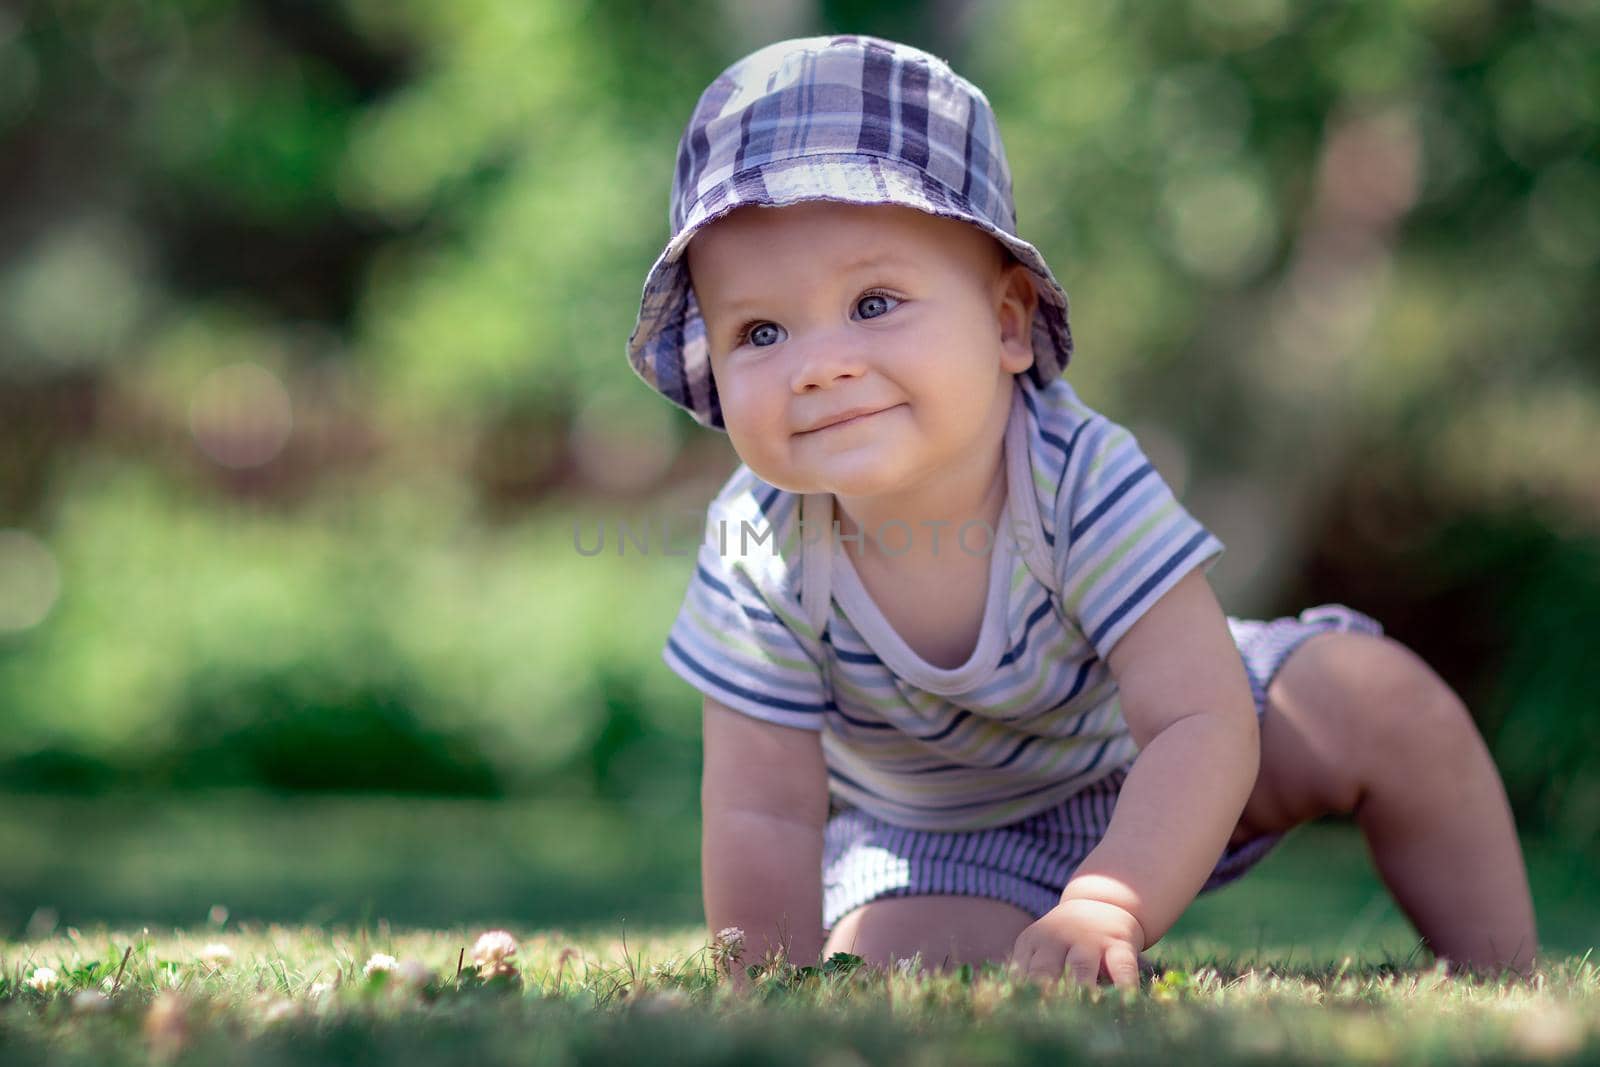 Baby with nice blue cap crawling on the green grass in the garden